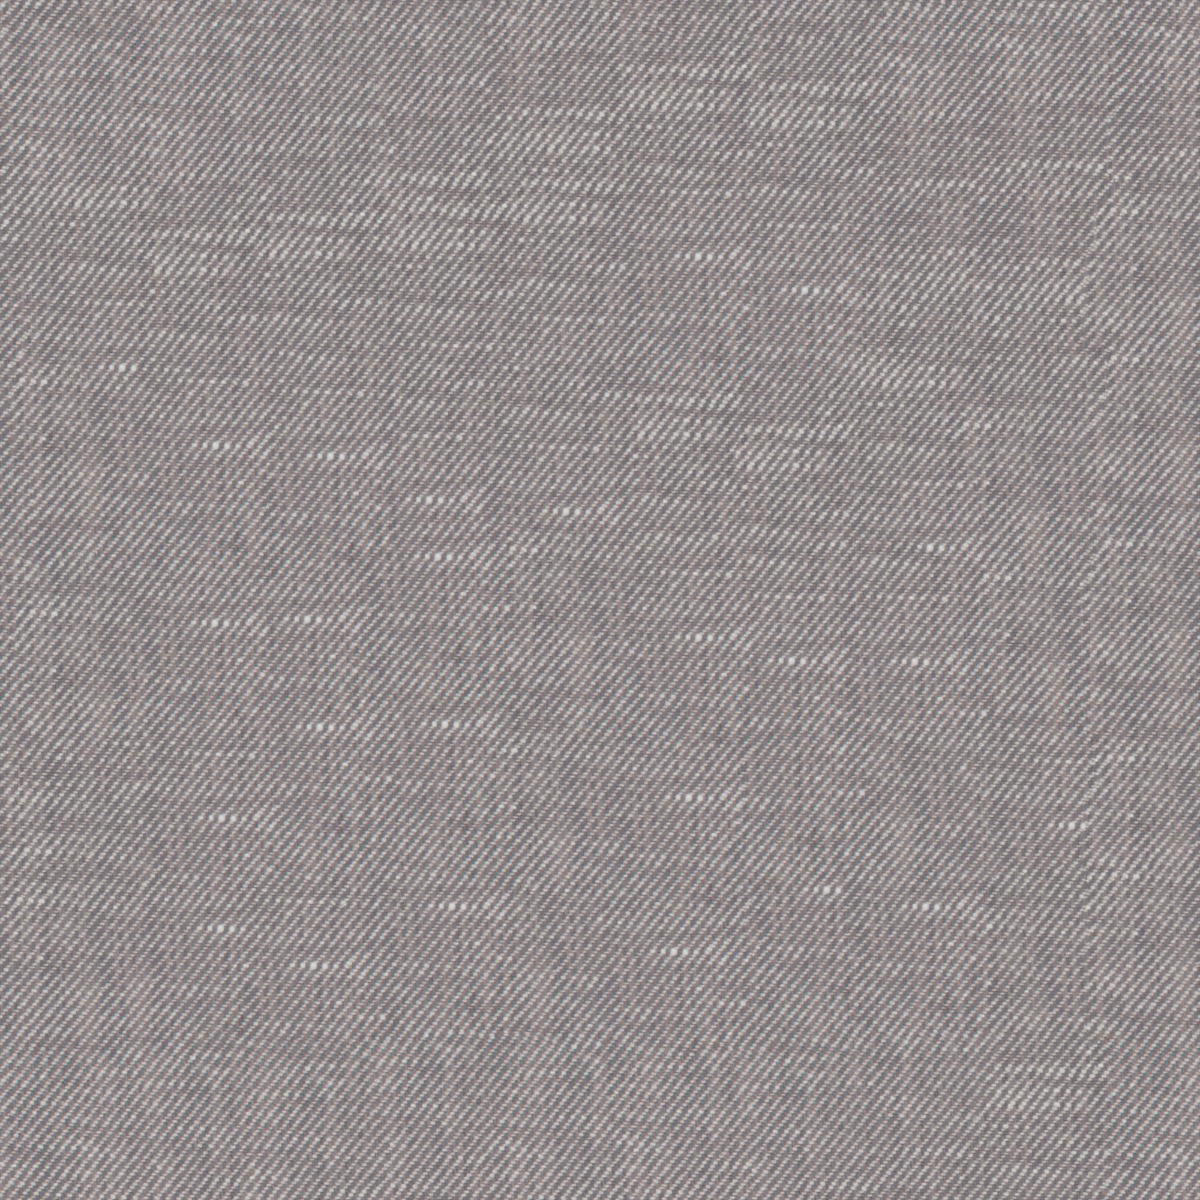 A seamless fabric texture with plain grey flat units arranged in a None pattern